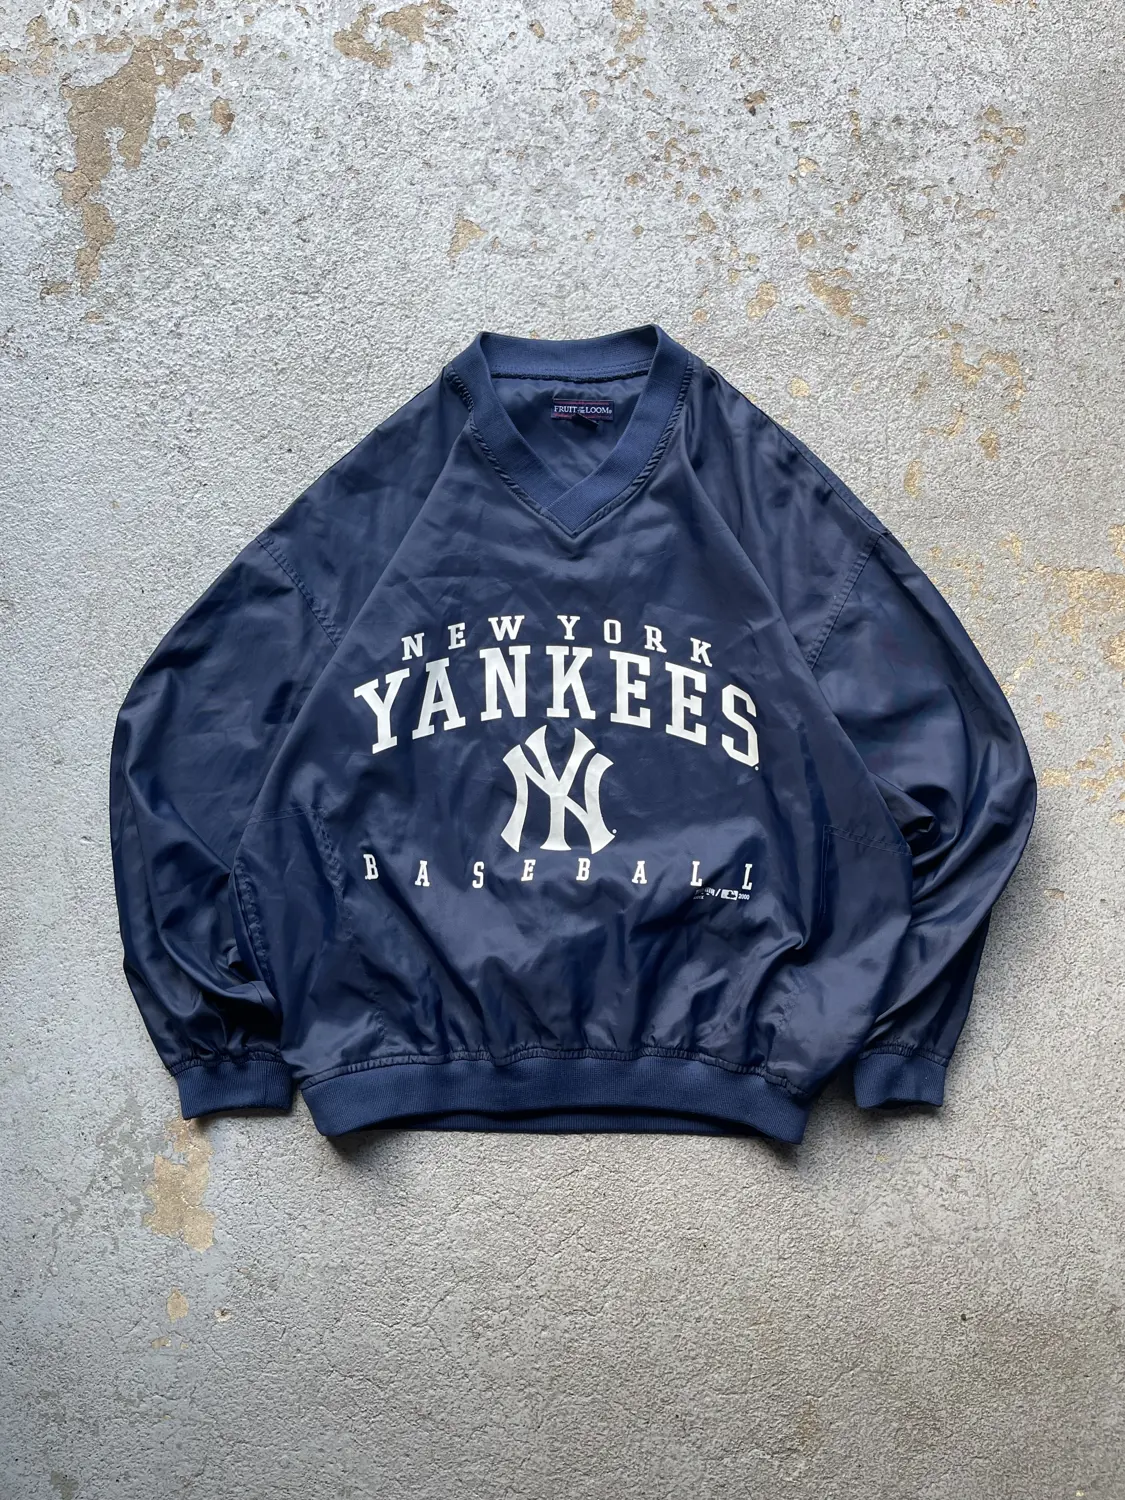 Vintage 2000s Yankees Pull over